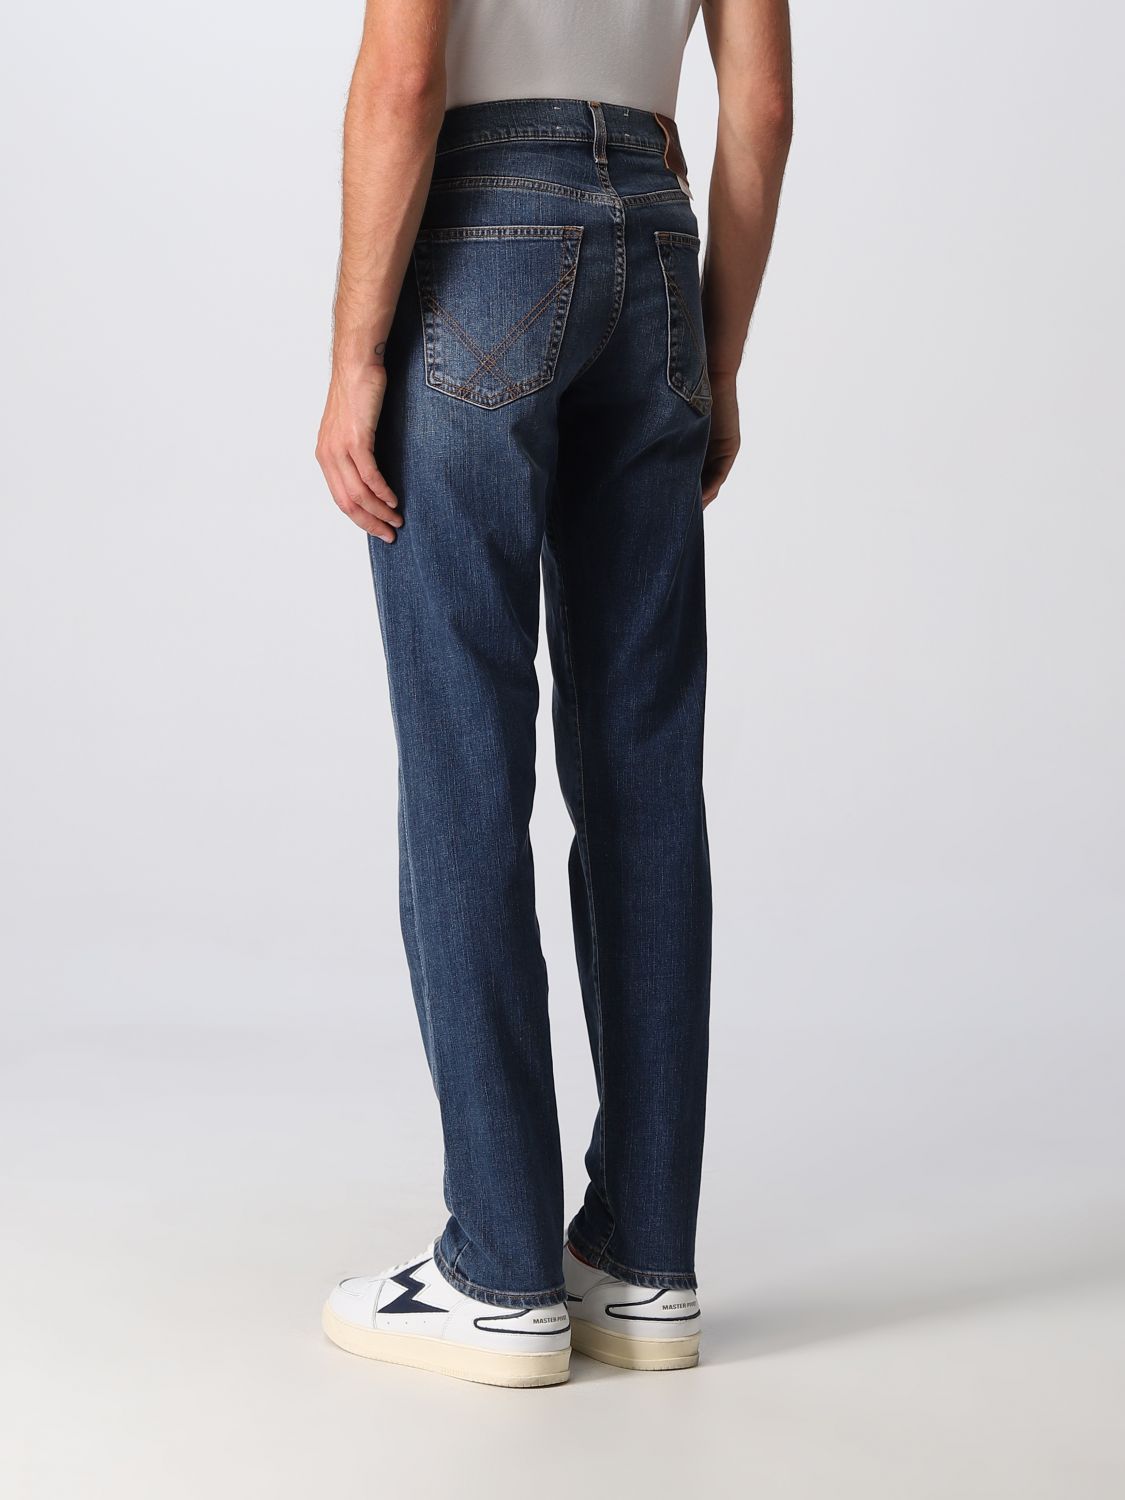 Jeans Roy Rogers: Jeans Roy Rogers para hombre azul oscuro 2